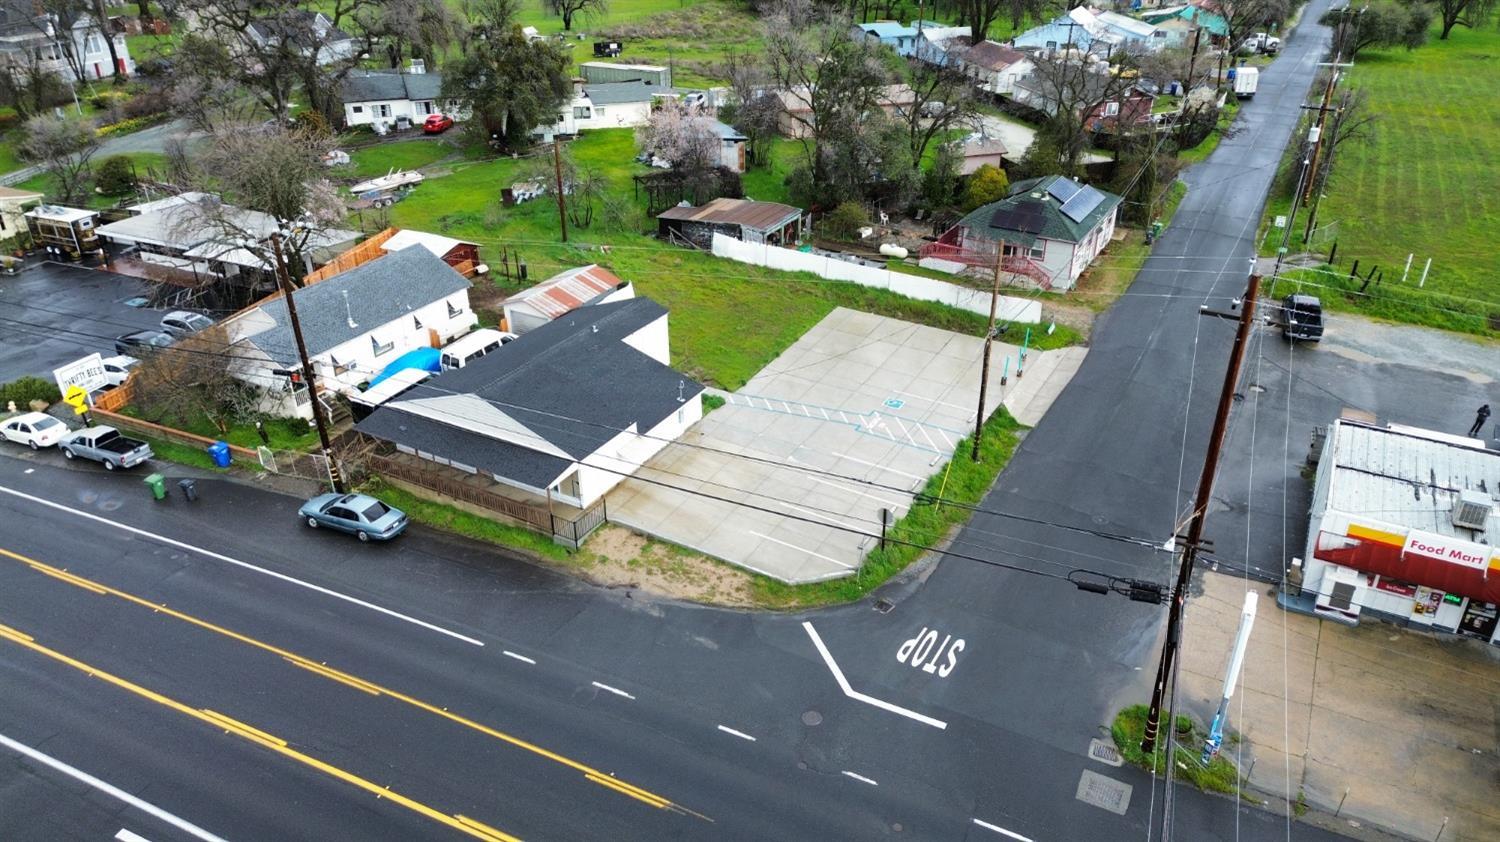 Prime Commercial Opportunity: 1550 sq ft building on a .23-acre corner lot for sale! Unbeatable location near a busy intersection, across from McDonald's, Starbucks, CVS, and a Shell Gas Station. Perfect for your office space, retail, or restaurant venture. Call 209-969-3549 for a showing!